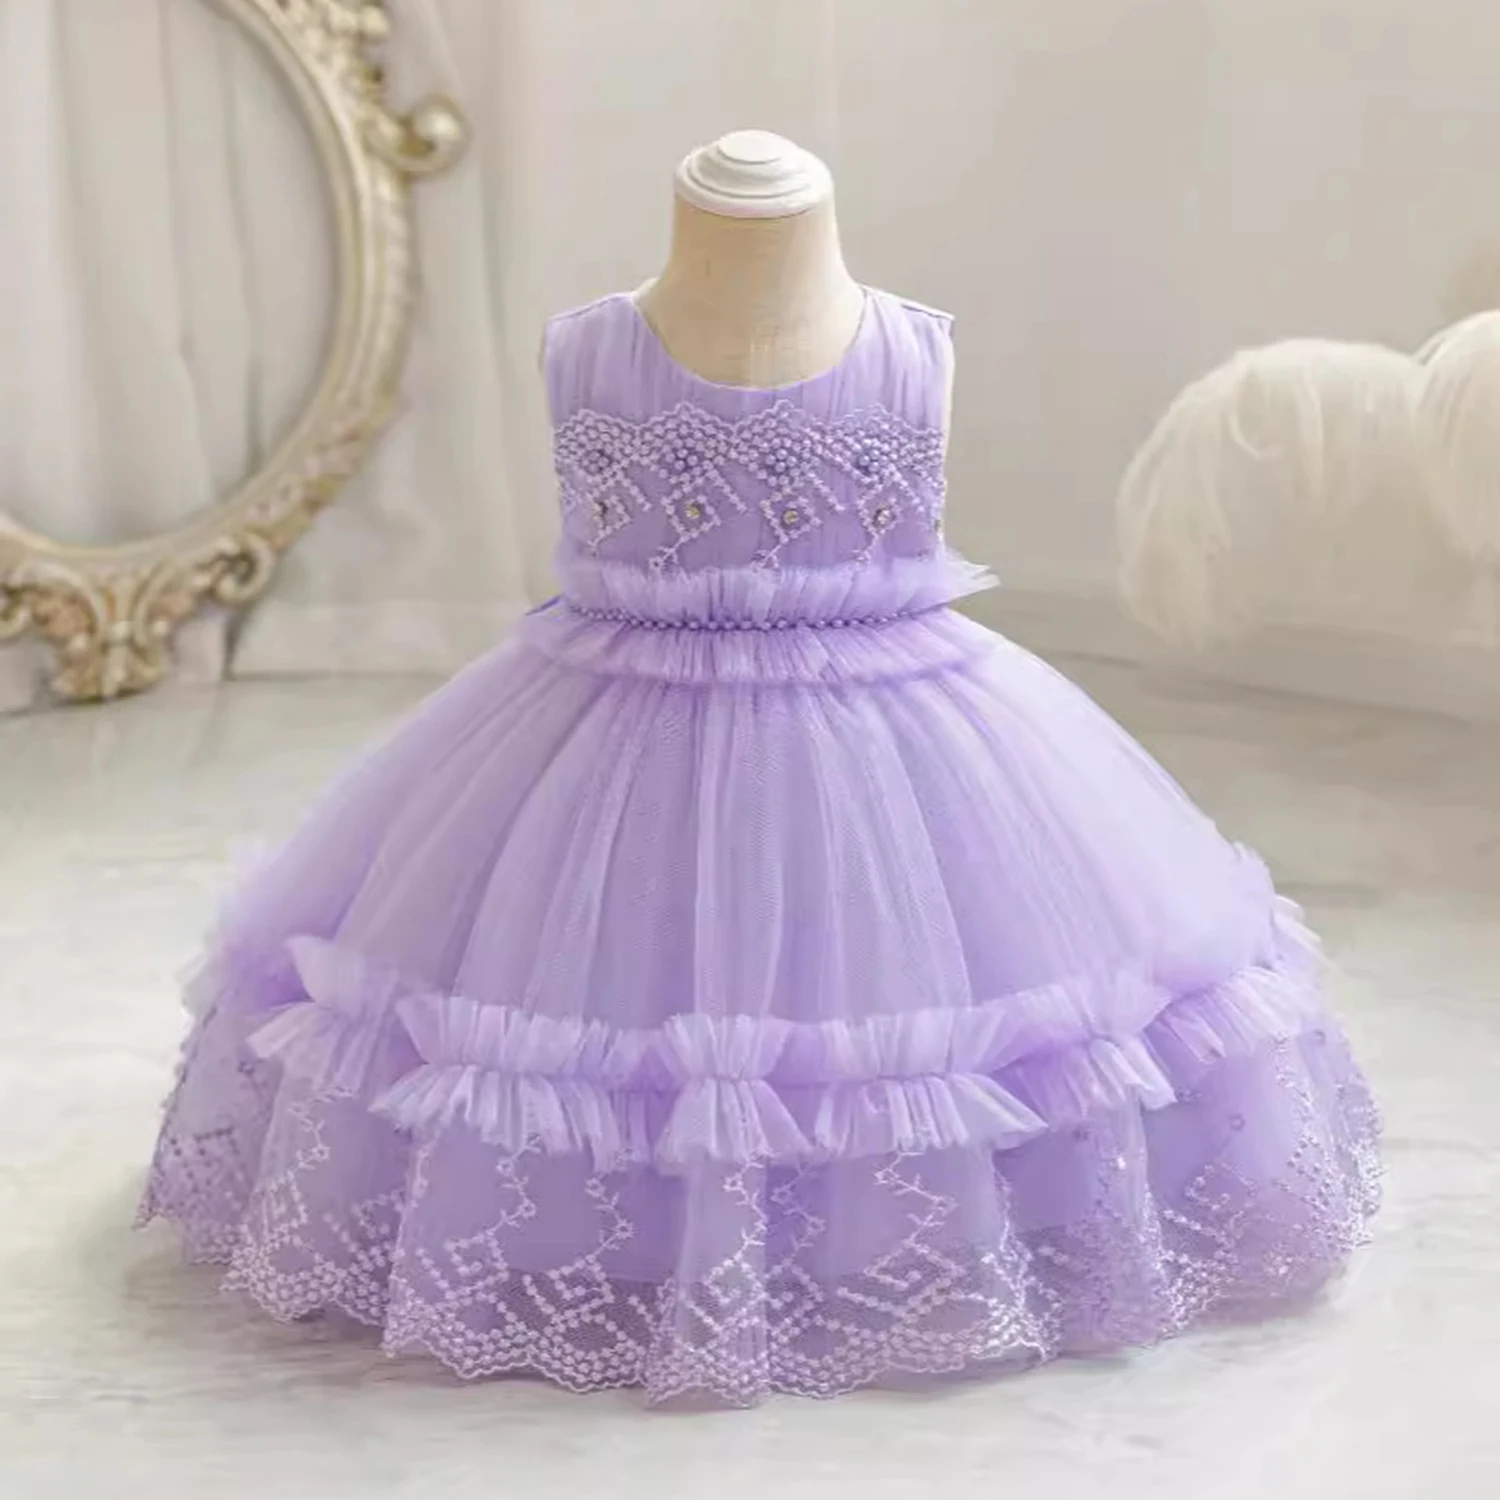 

XMLSY Baby Toddler Embroidered Appliqued Wedding Flower Girls Birthday Party Pageant Toddler Formal Dress Cupcake Tutu TT103